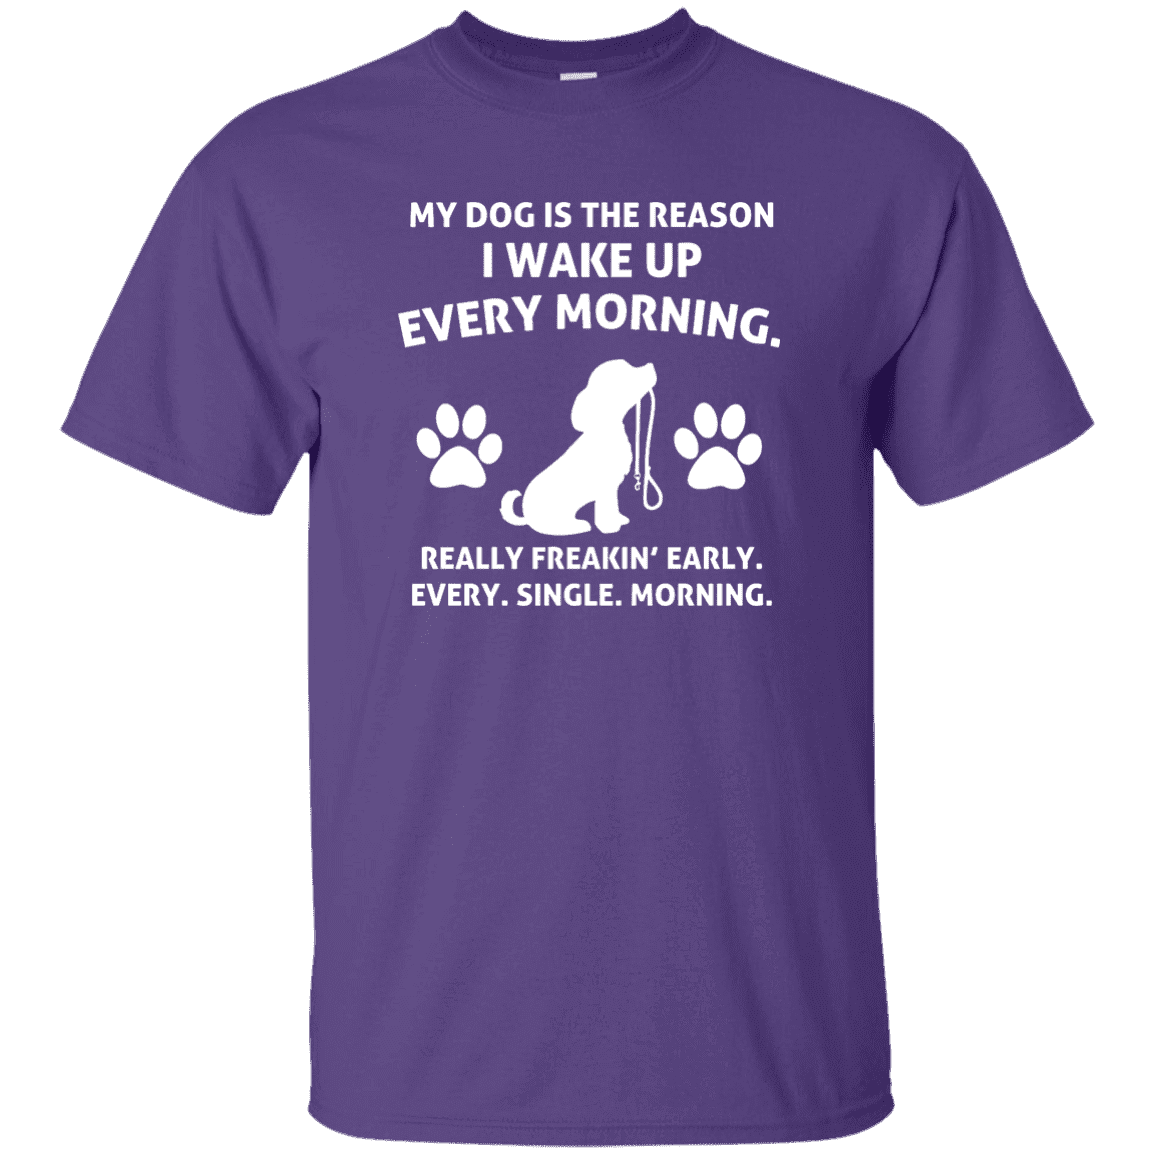 My Dog Is The Reason- - T Shirt.